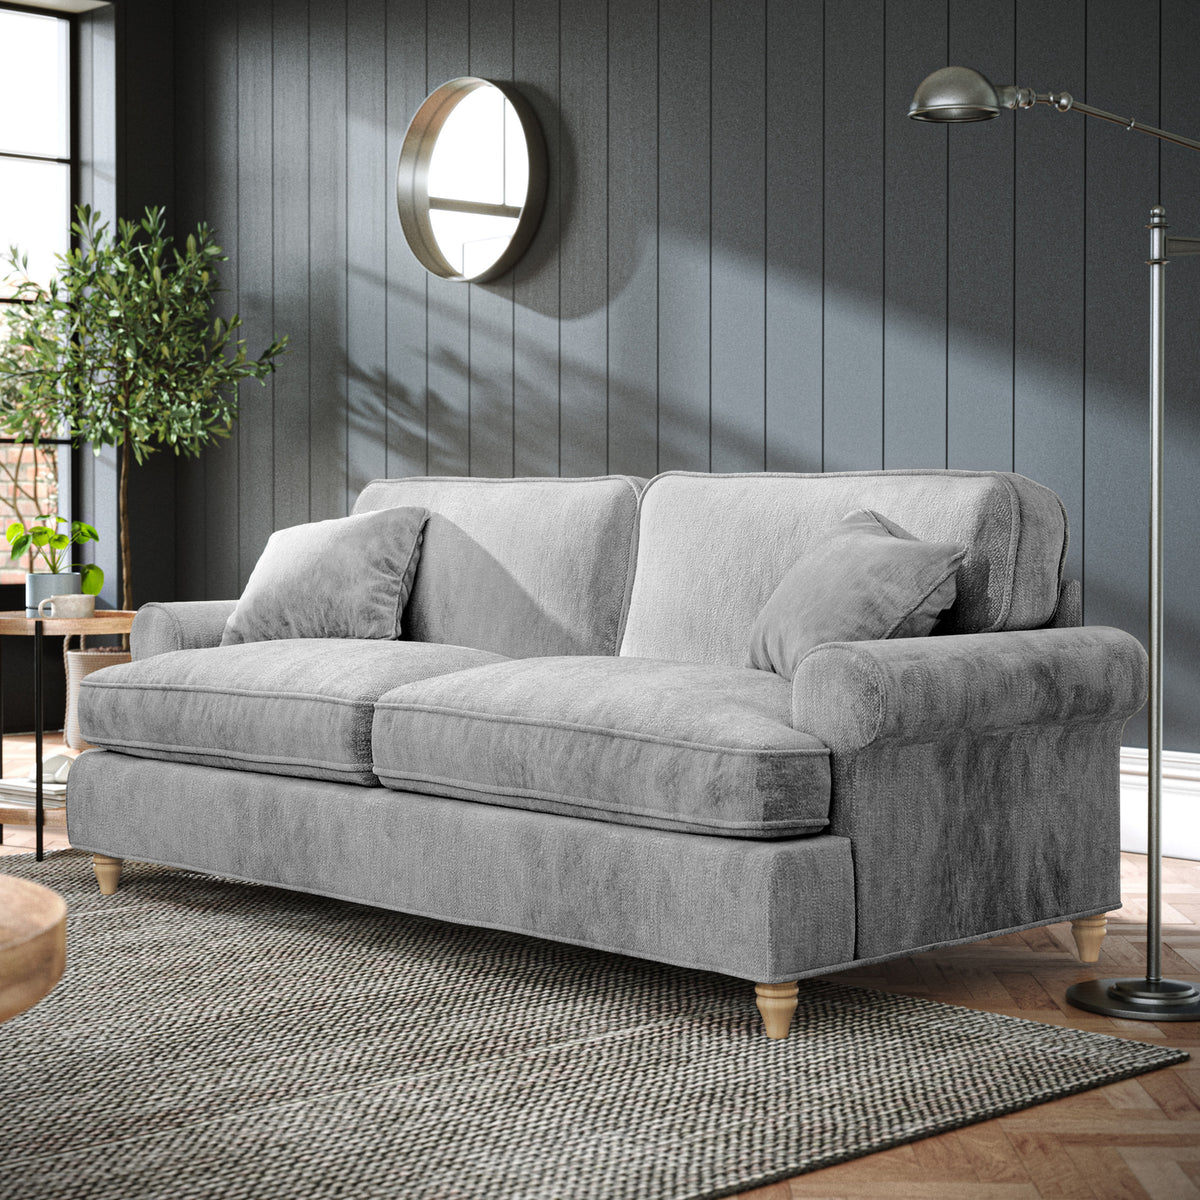 Alfie Ice Grey 3 Seater Sofa from Roseland Furniture